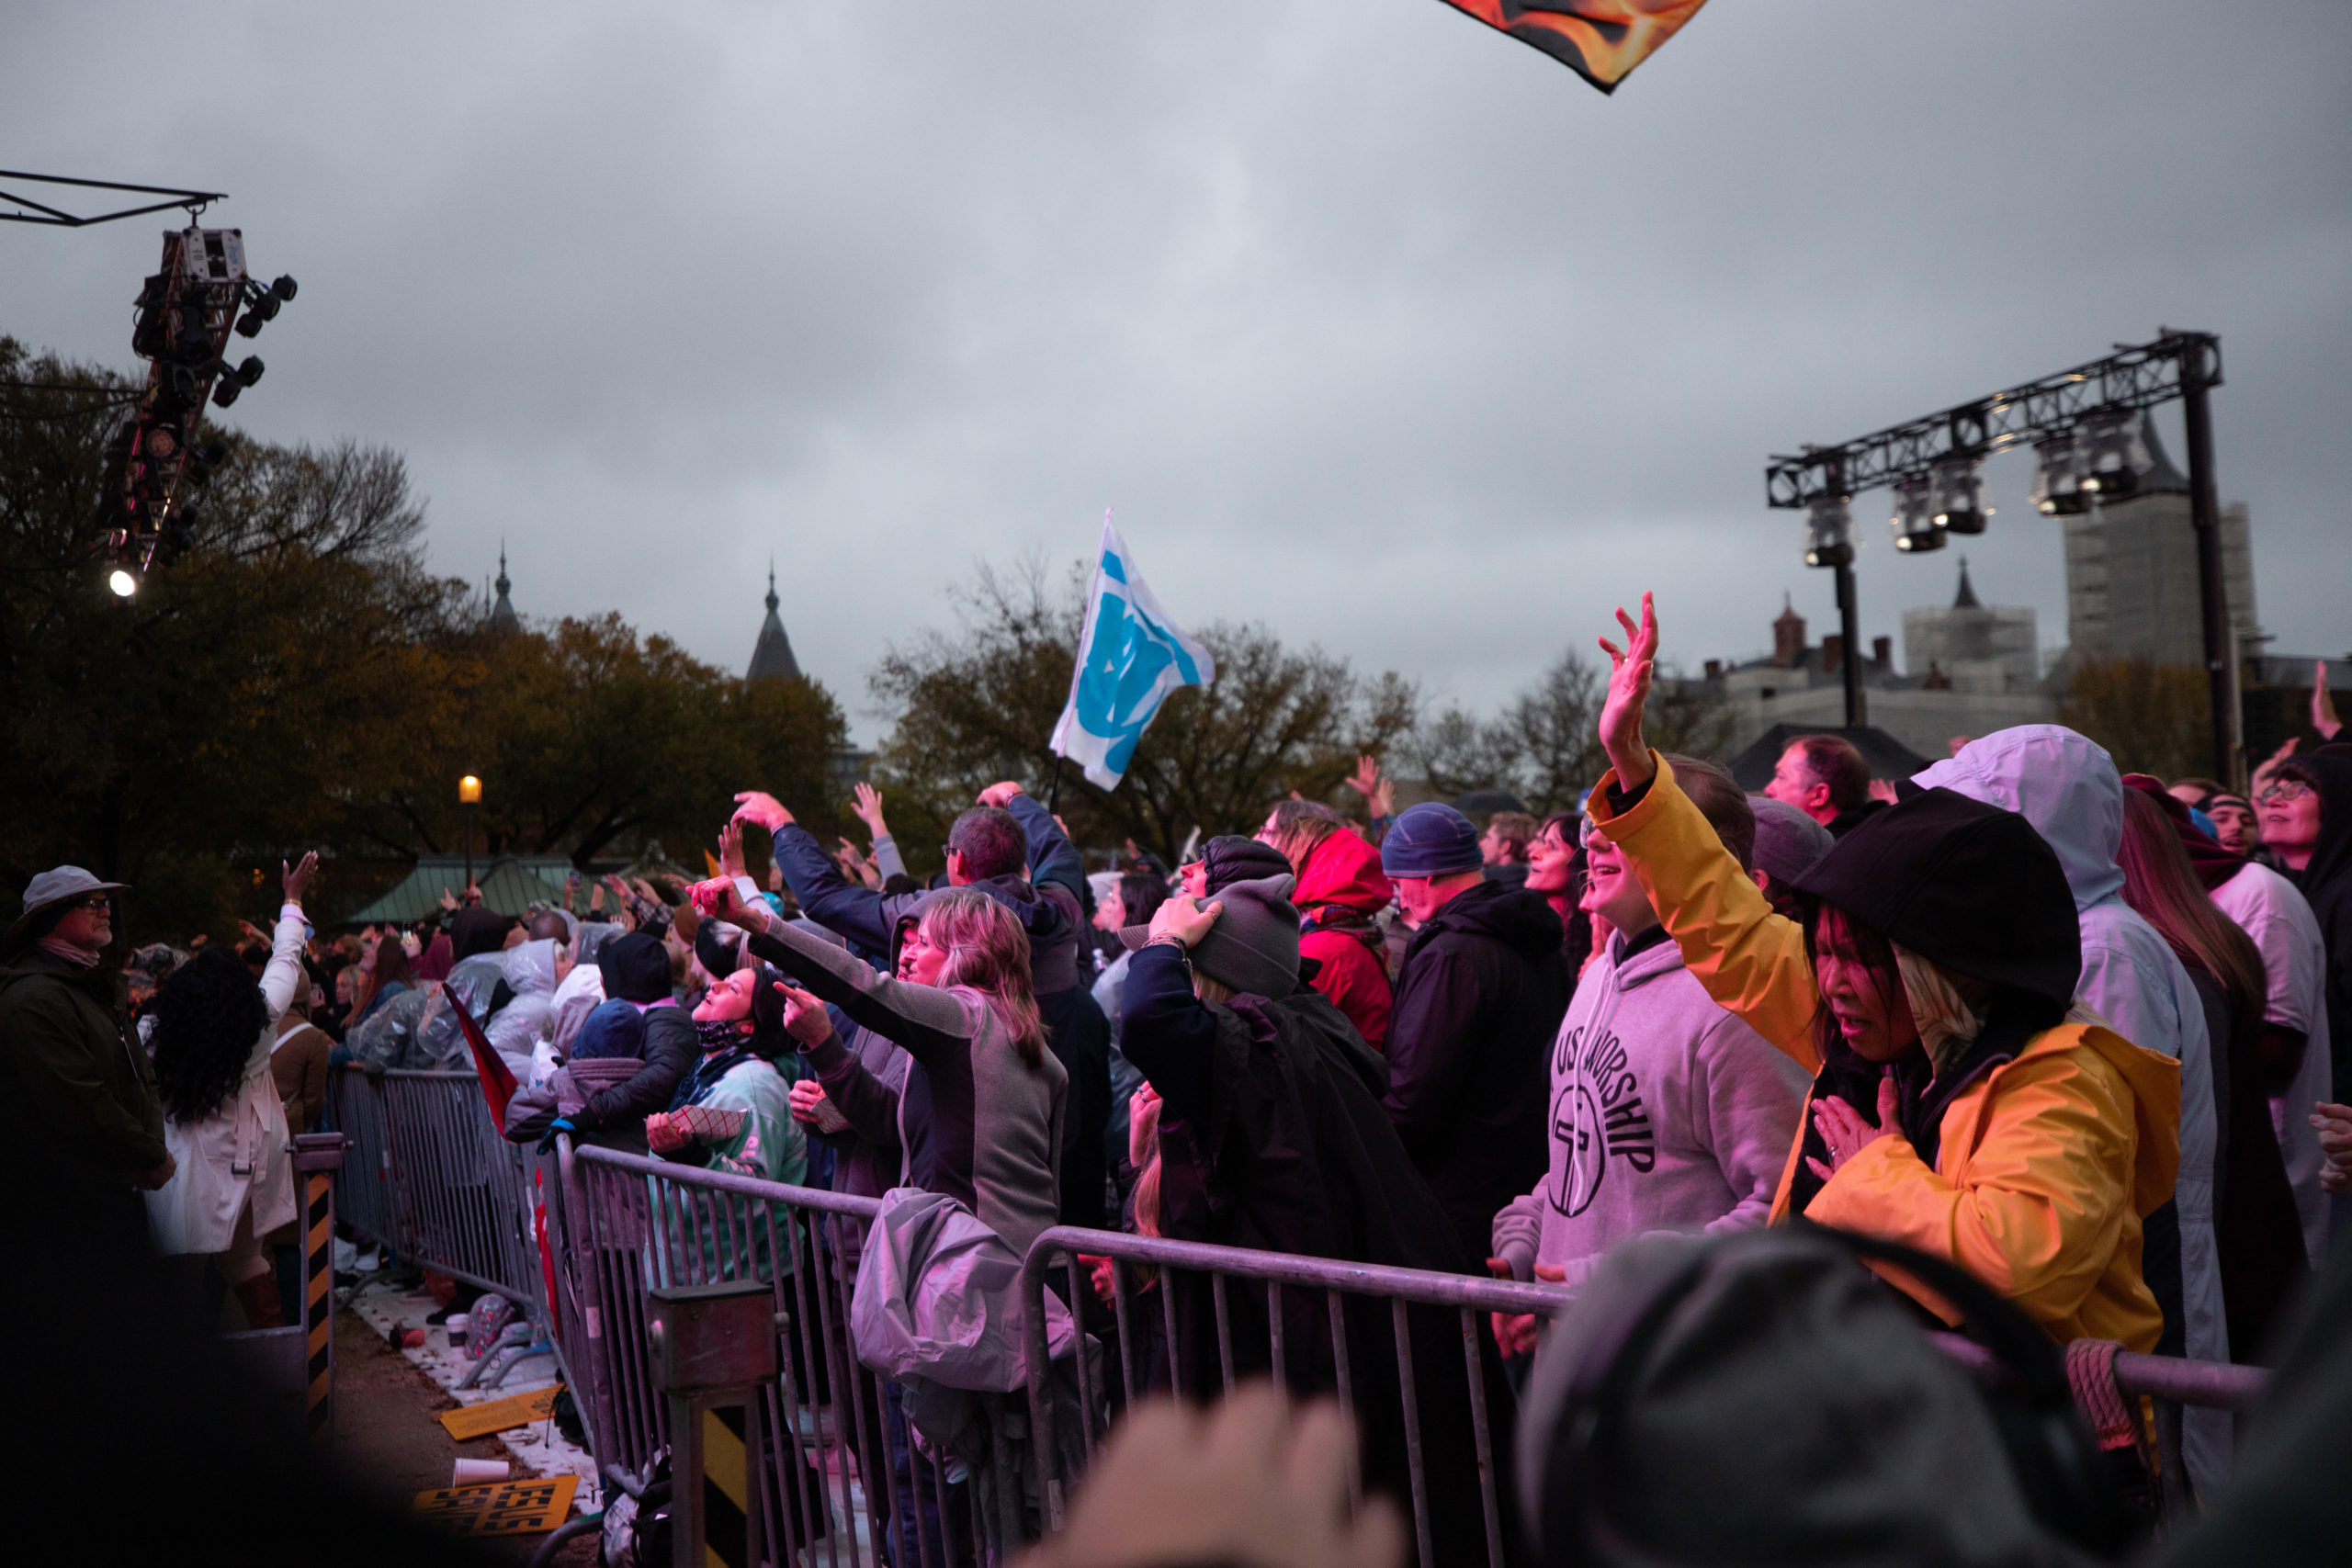 Attendees sang songs of worship and praise at the "Let Us Worship" protest in Washington, D.C. on October 25, 2020. (Kaylee Greenlee - DCNF)